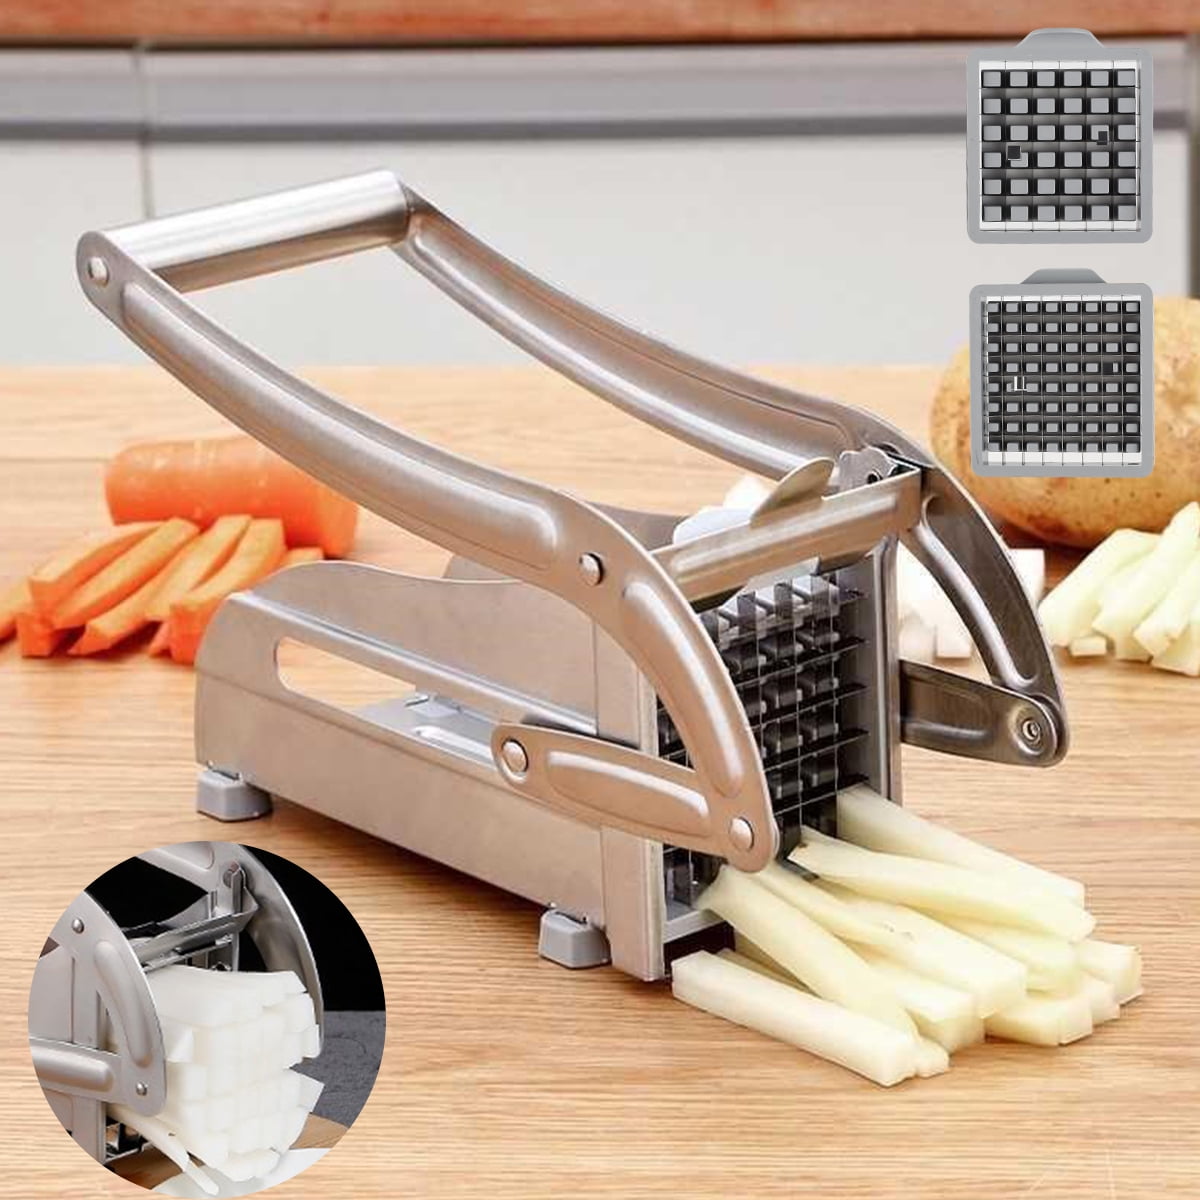 Multifunction Vegetable Cutter: Slices, Julienne, Cubes, Fries, Stainless  Steel Blade, Onion, Carrot, Potato, Tomato, Fruit---gray